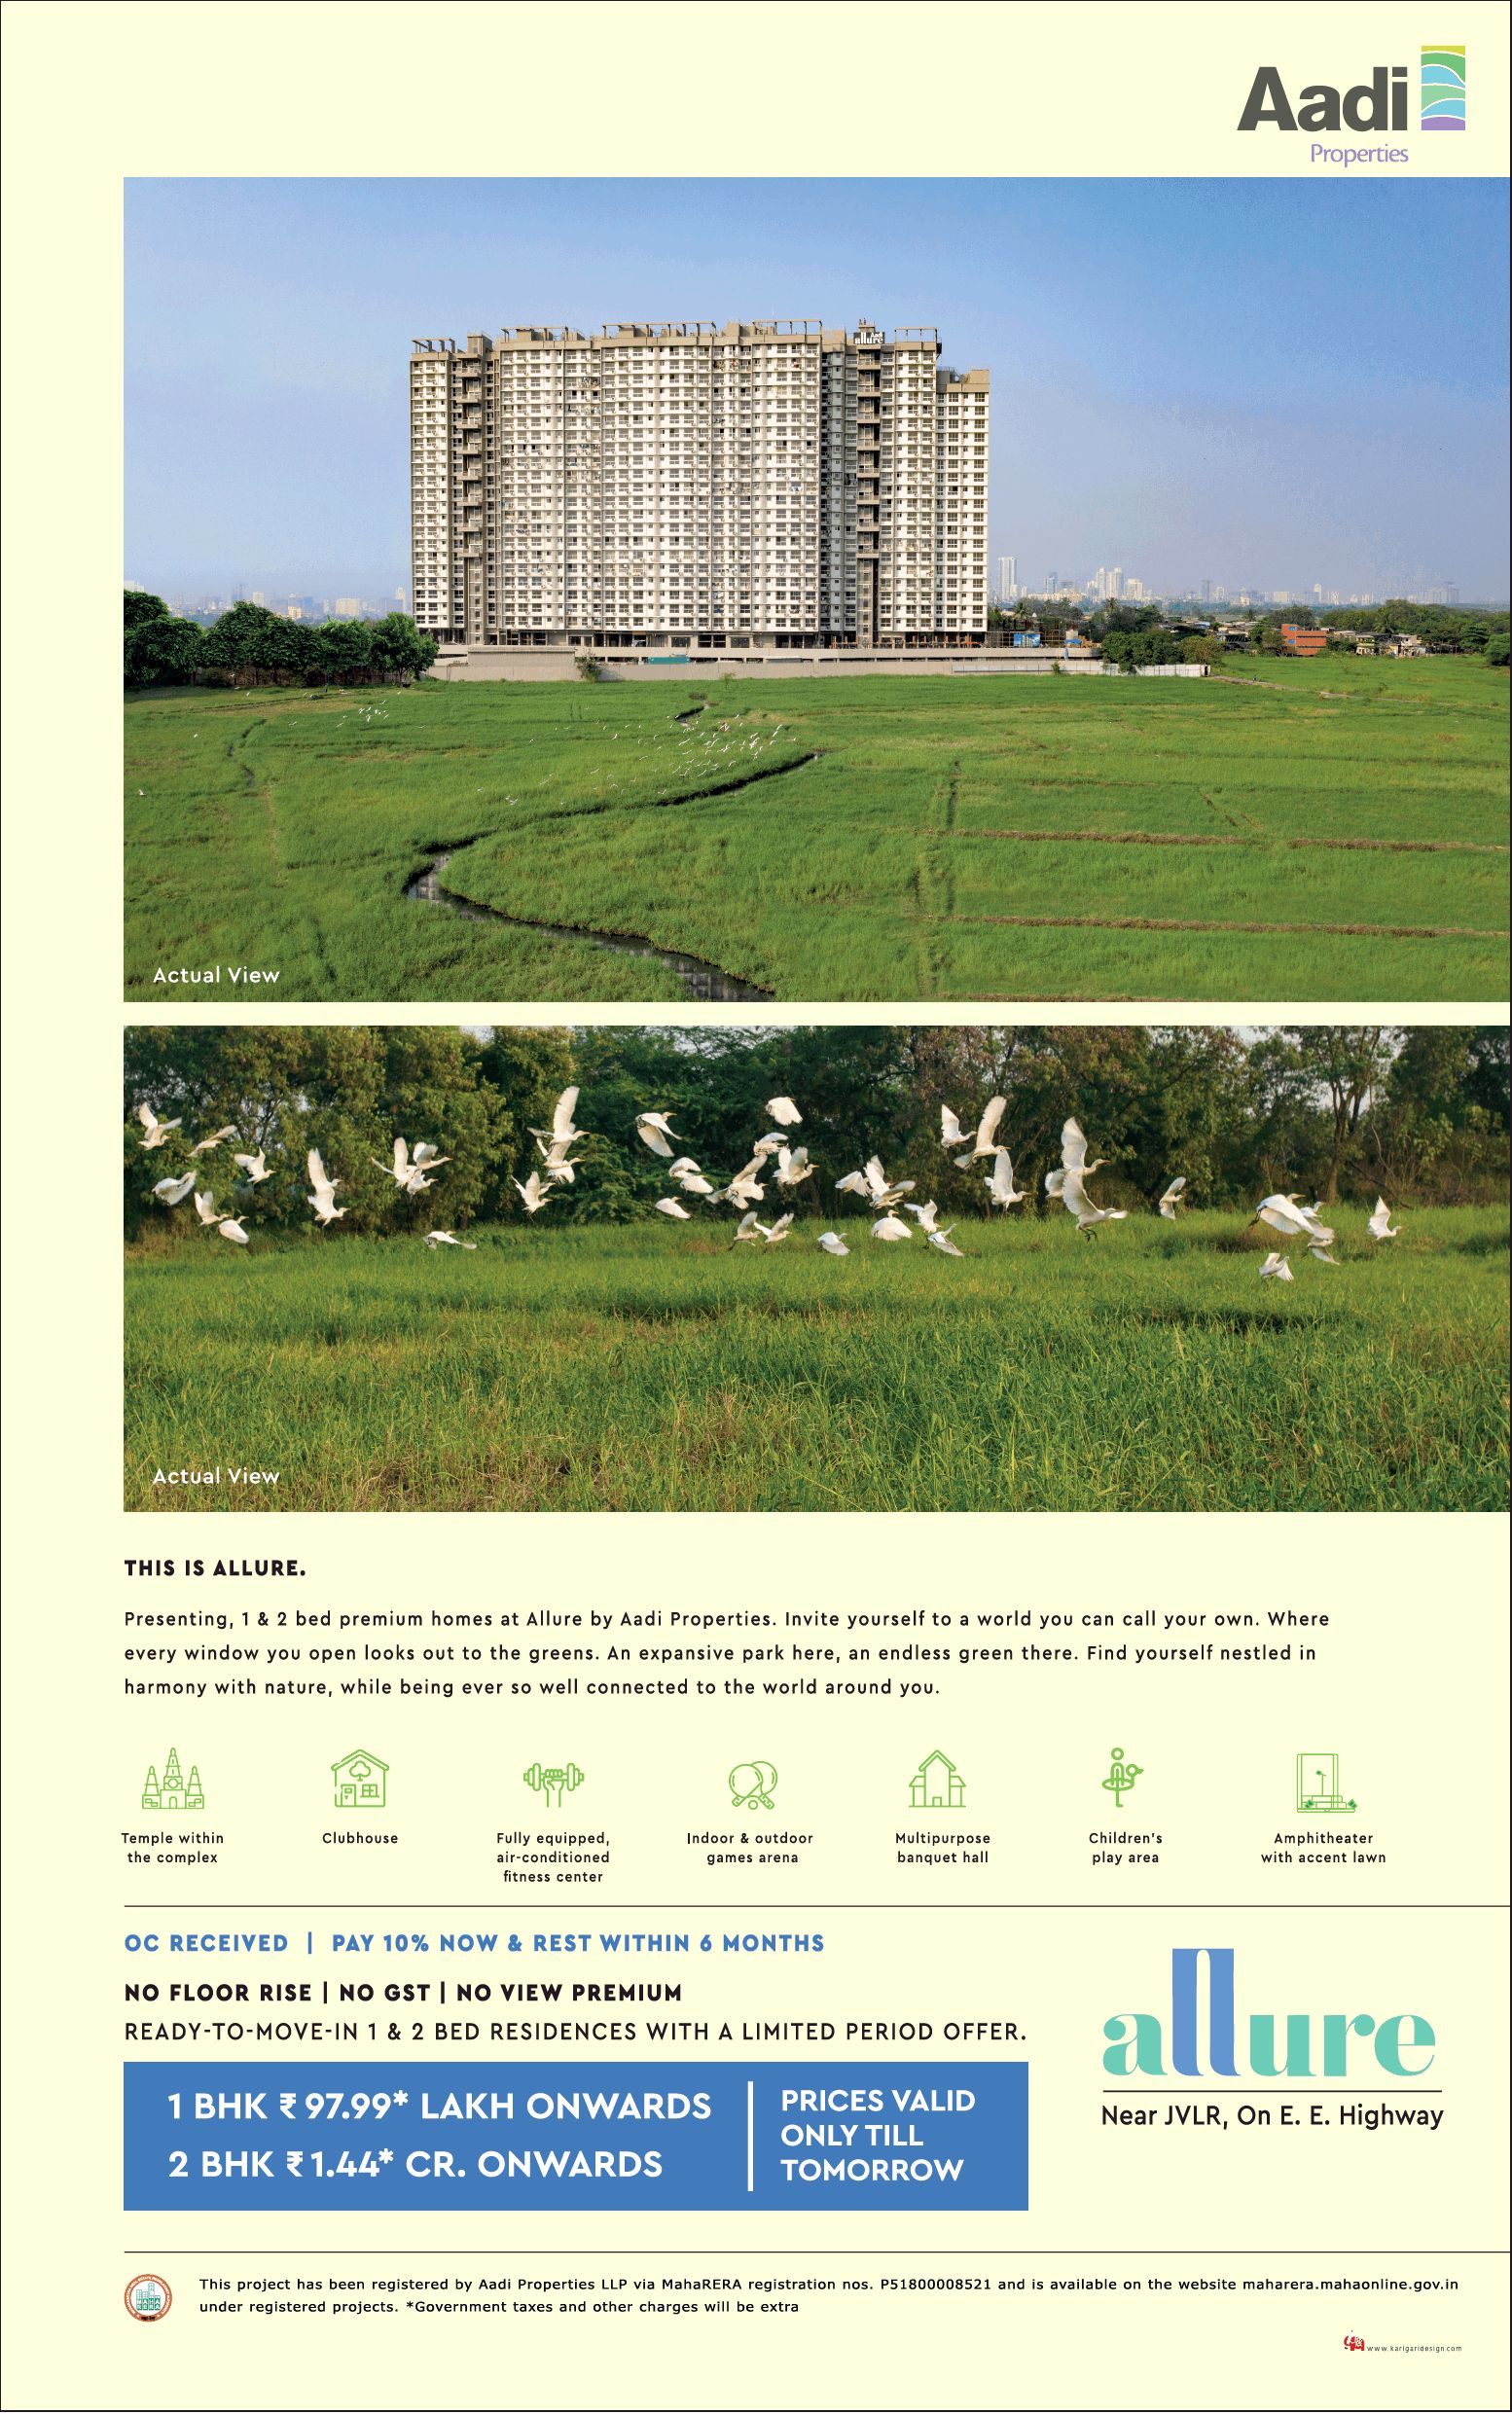 Ready-to-move-in 1 & 2 bed residences starting Rs 97.99 Lac at Aadi Allure, Mumbai Update